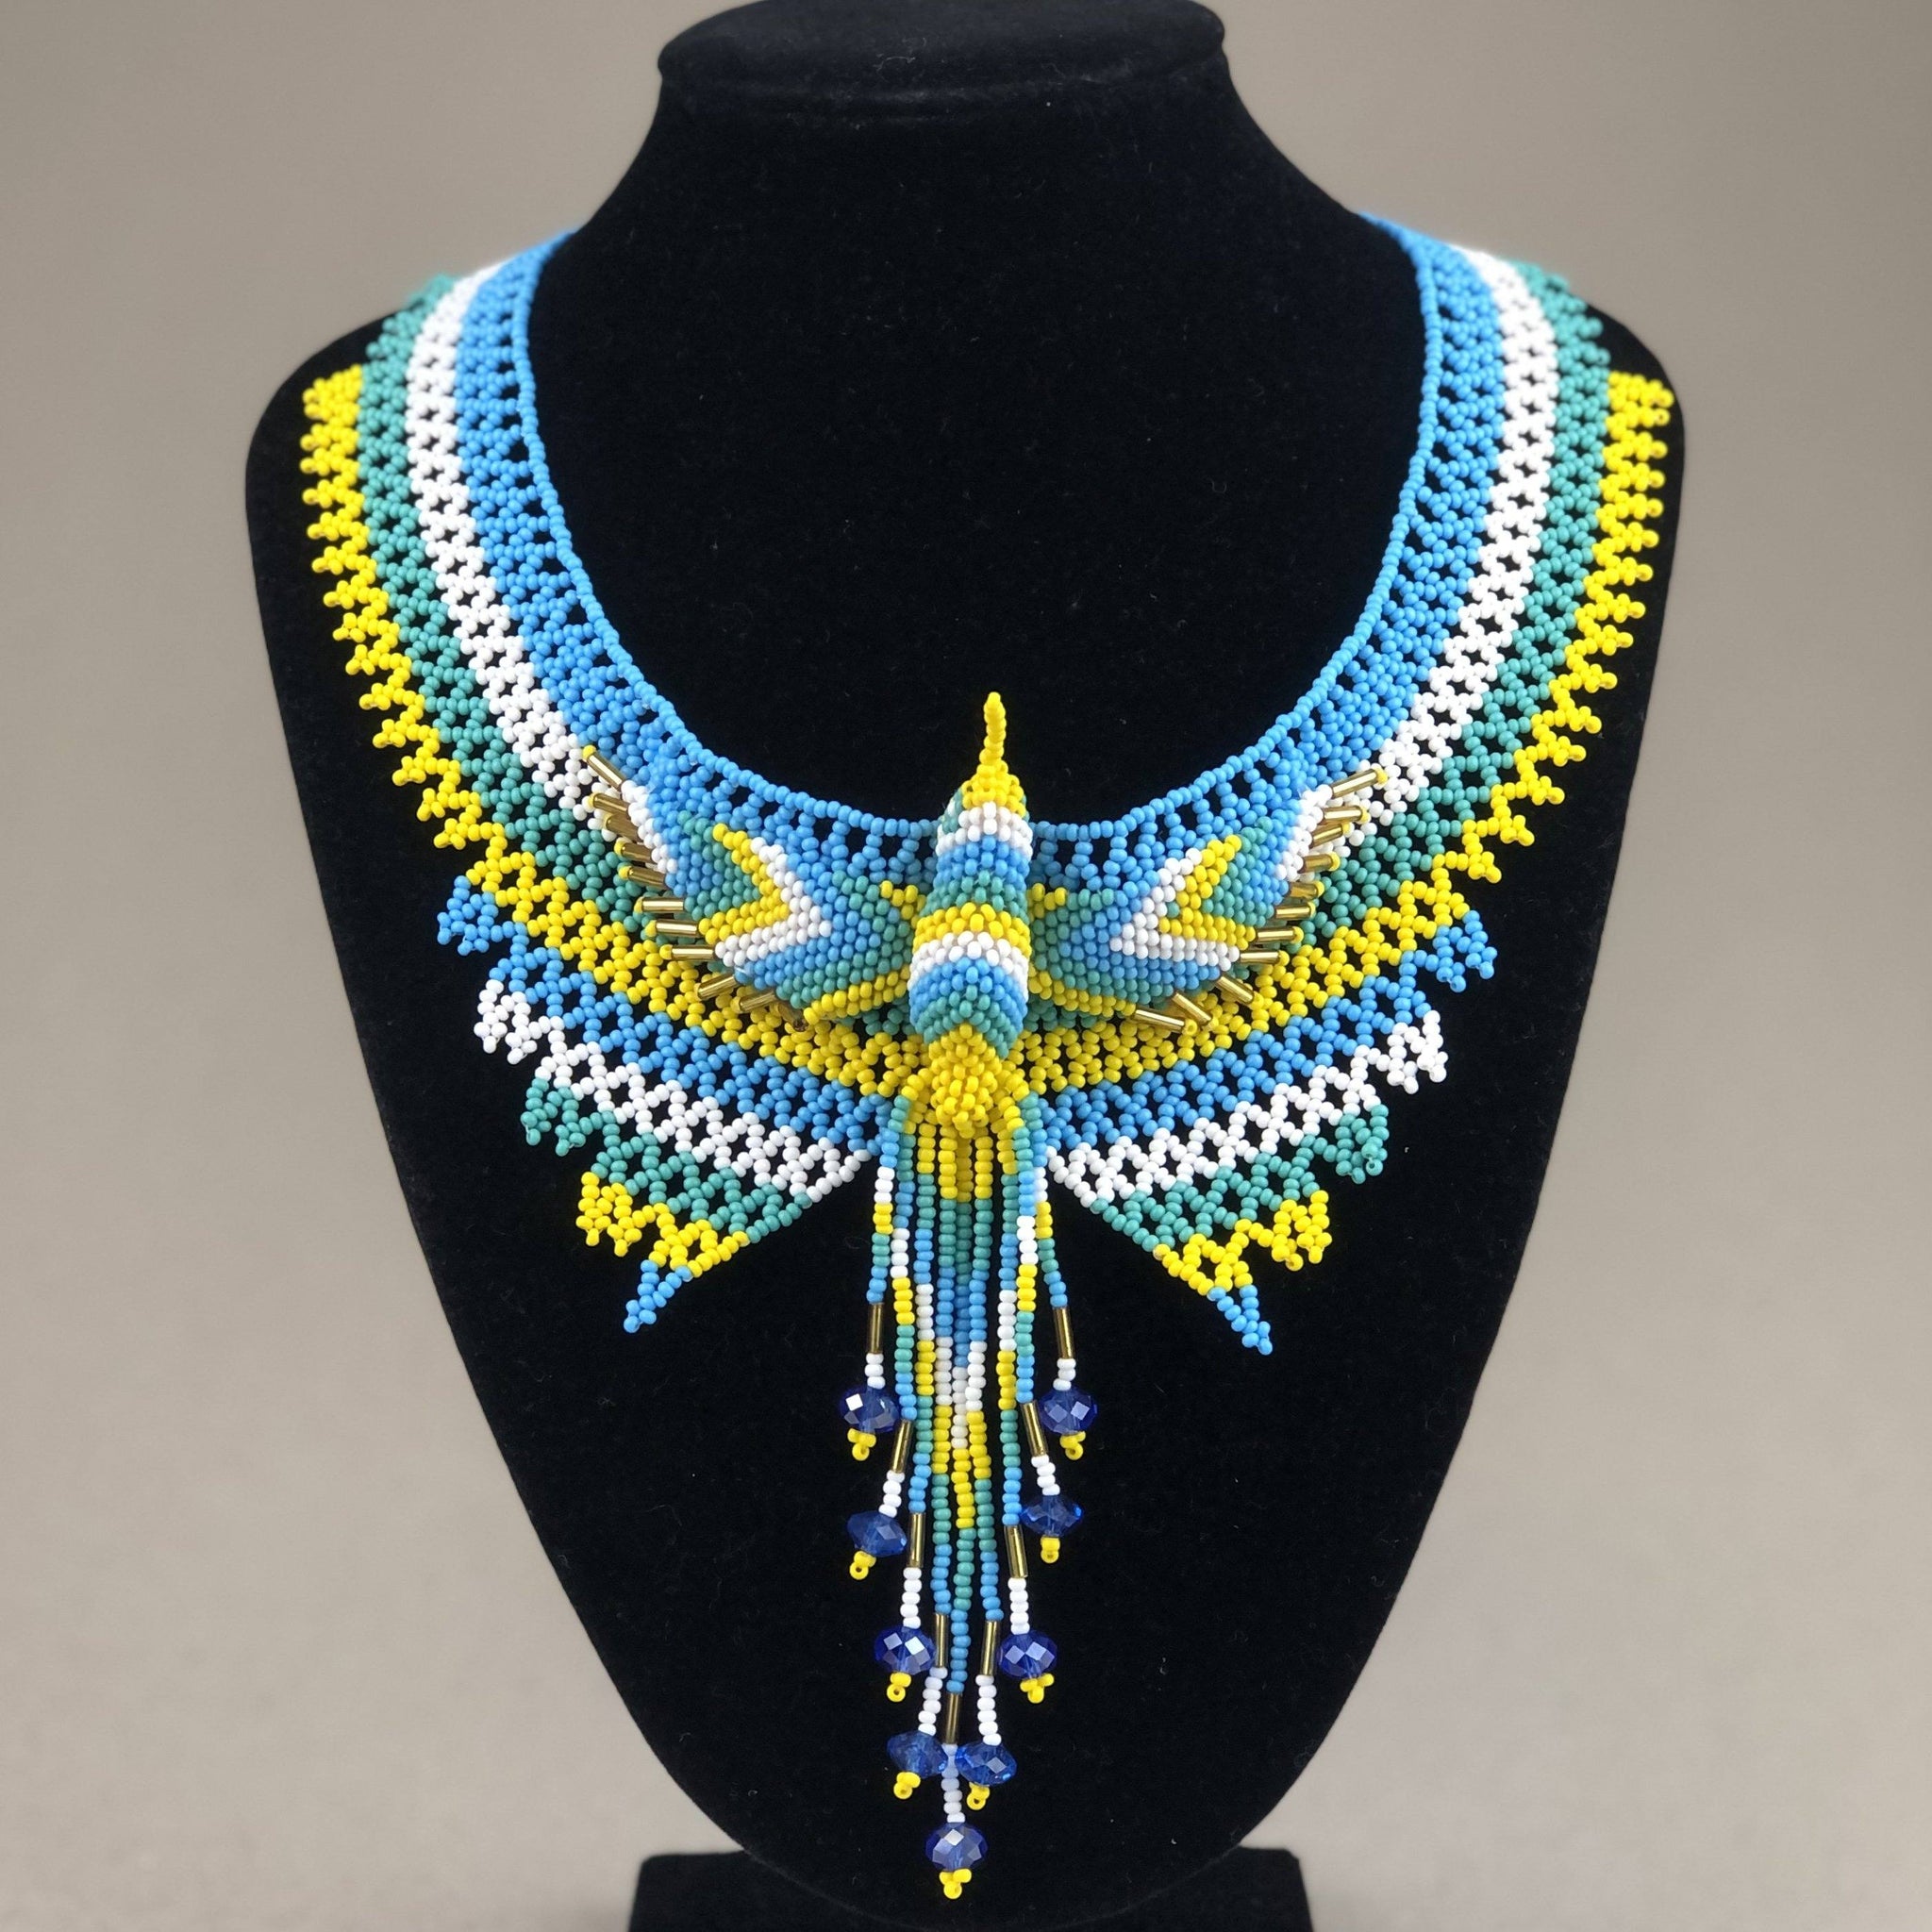 MEXICAN BEADS WEAVING NECKLACE - URBAN TRIBE